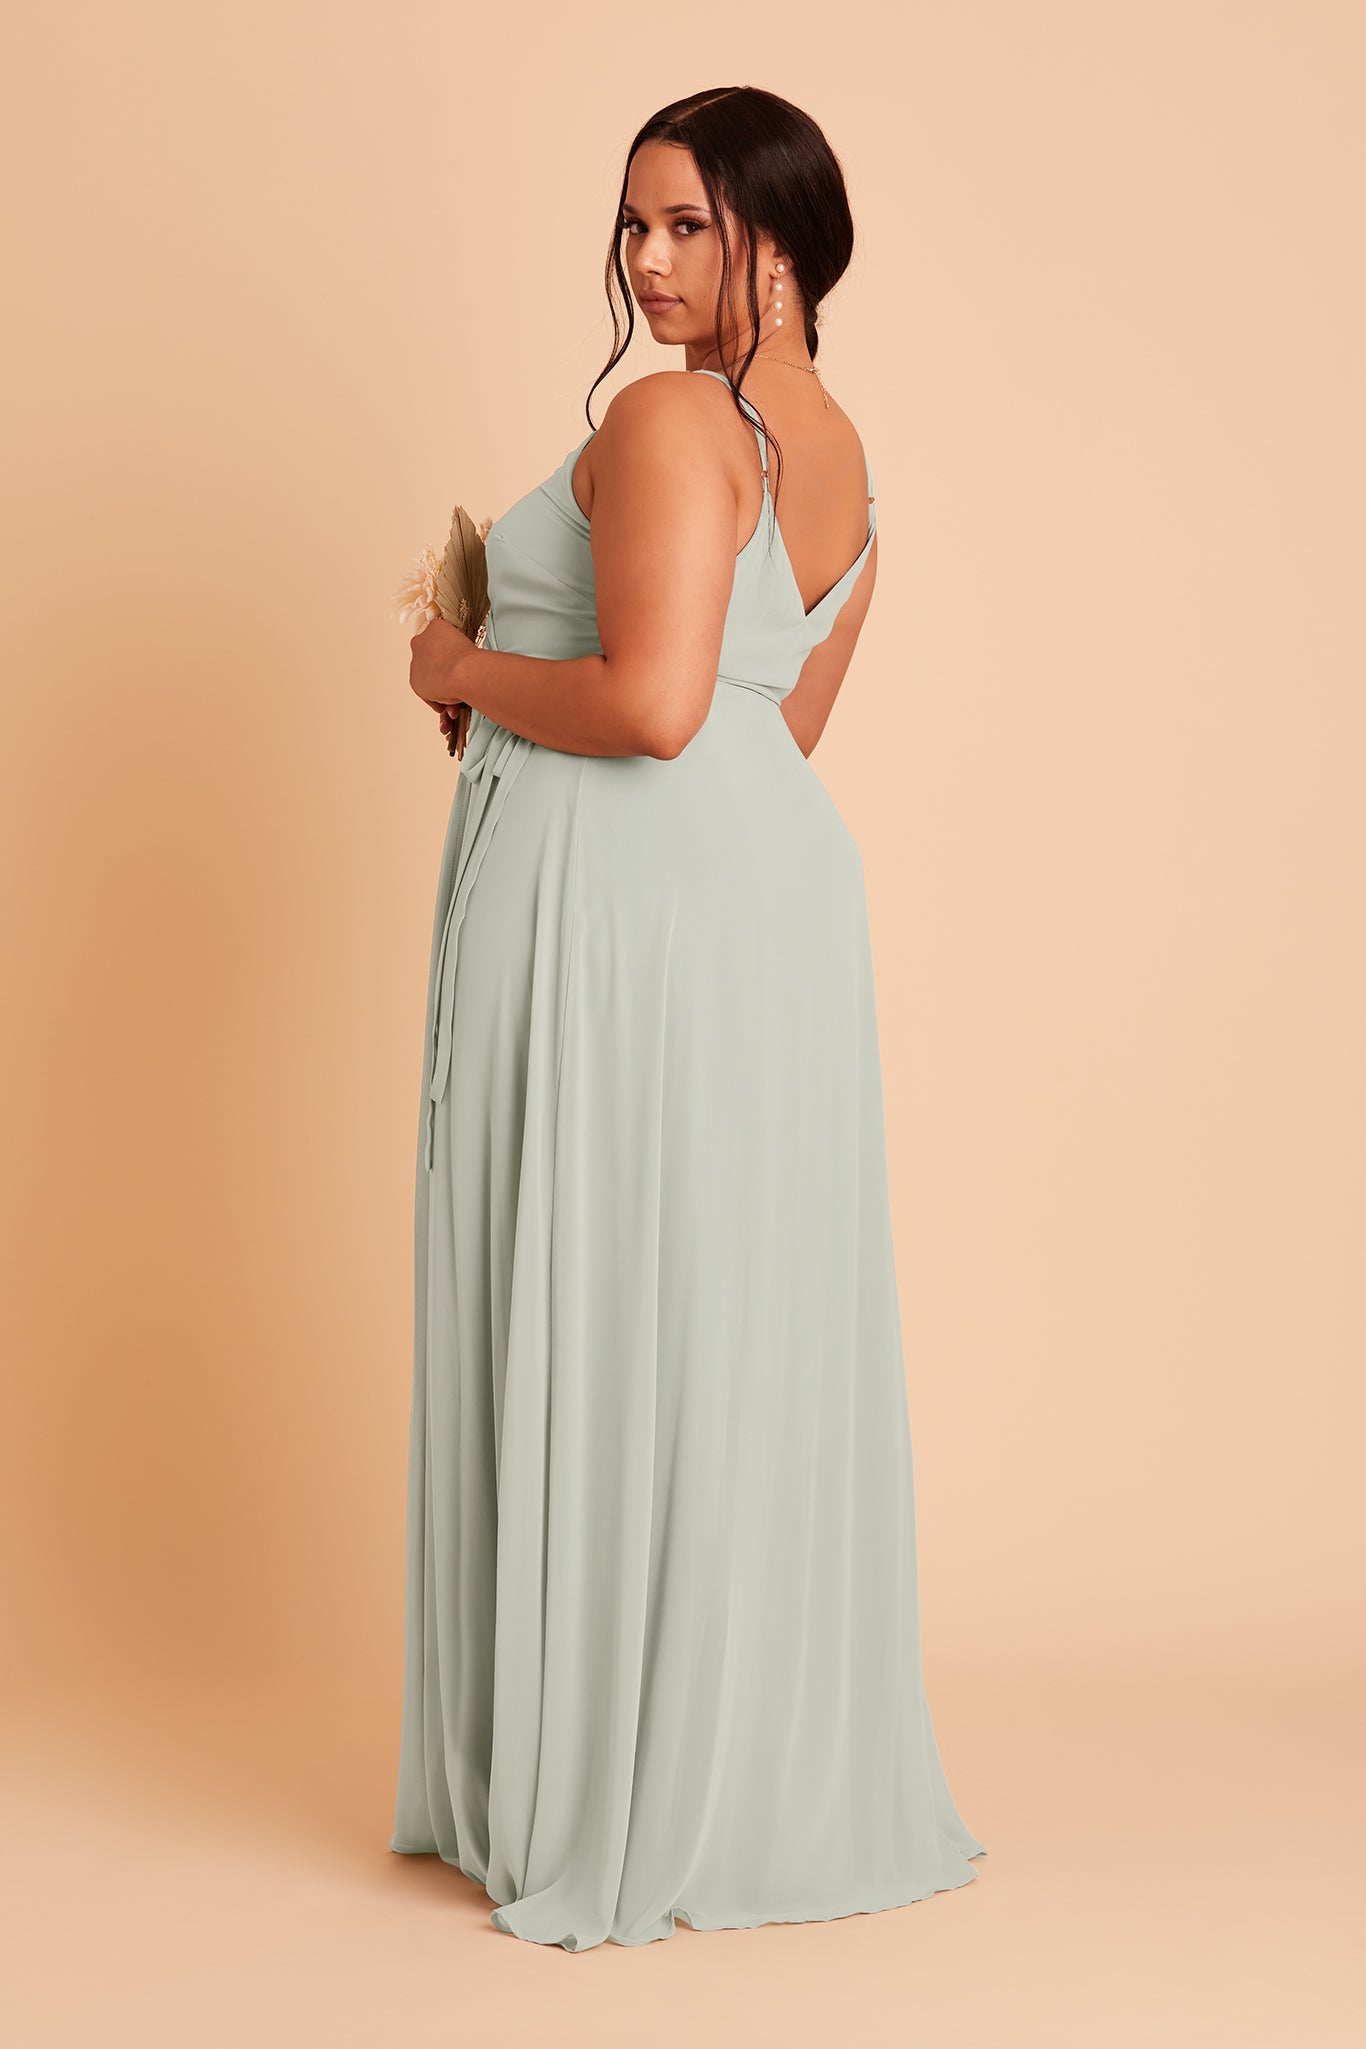 Back view of the Cindy Plus Size Bridesmaid Dress in sage chiffon reveals adjustable spaghetti straps and a V-shaped cut over the shoulder blades.